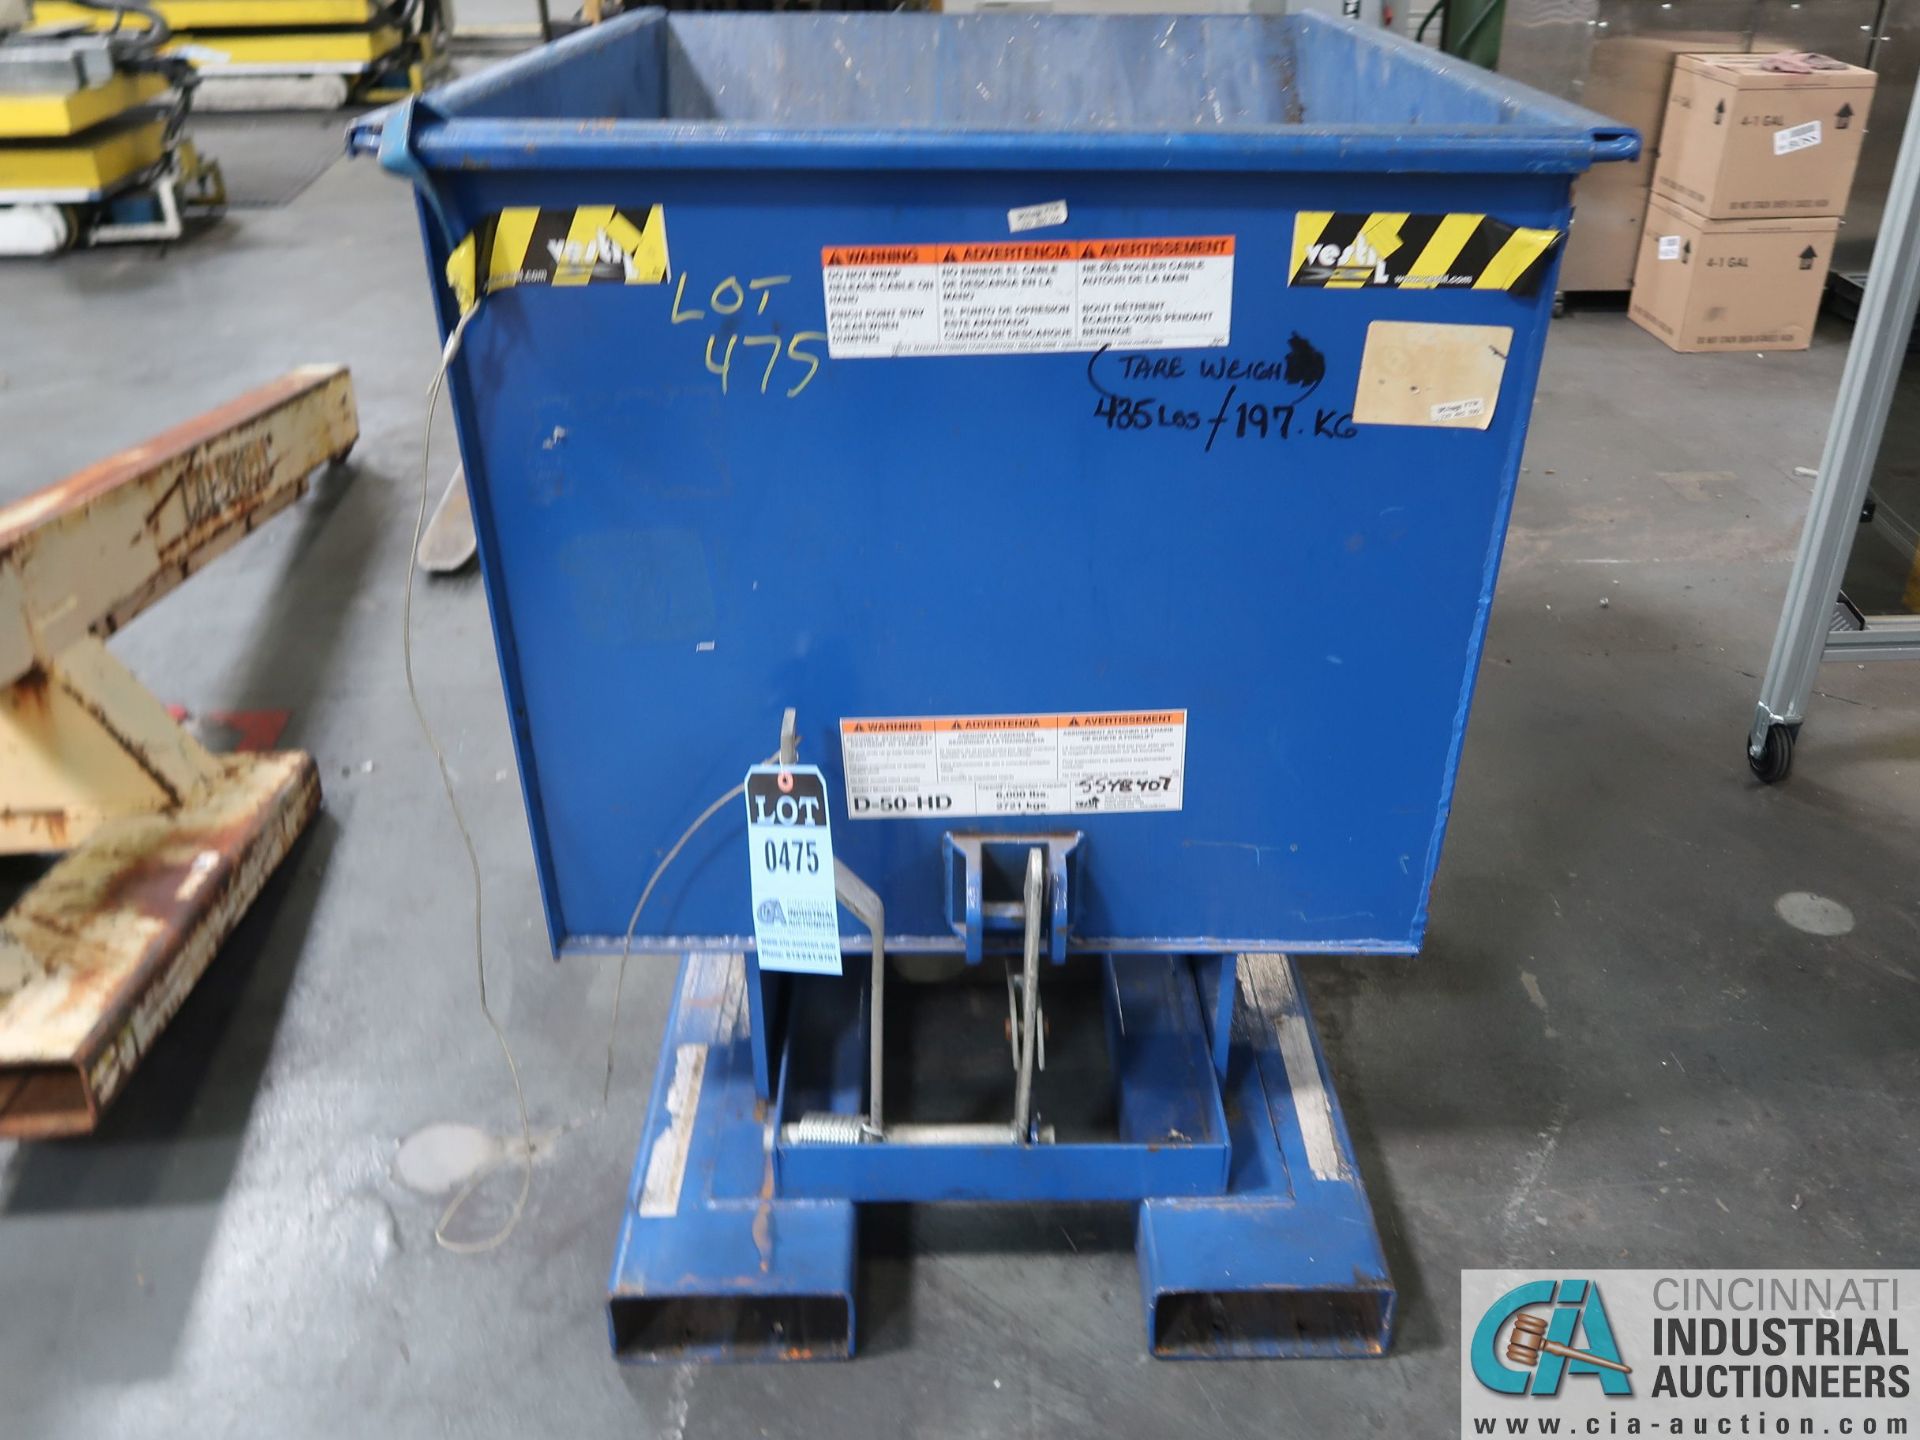 VESTIL MODEL D-50-HD SELF-DUMPING HOPPER *$25.00 RIGGING FEE DUE TO INDUSTRIAL SERVICES AND SALES* - Image 2 of 3